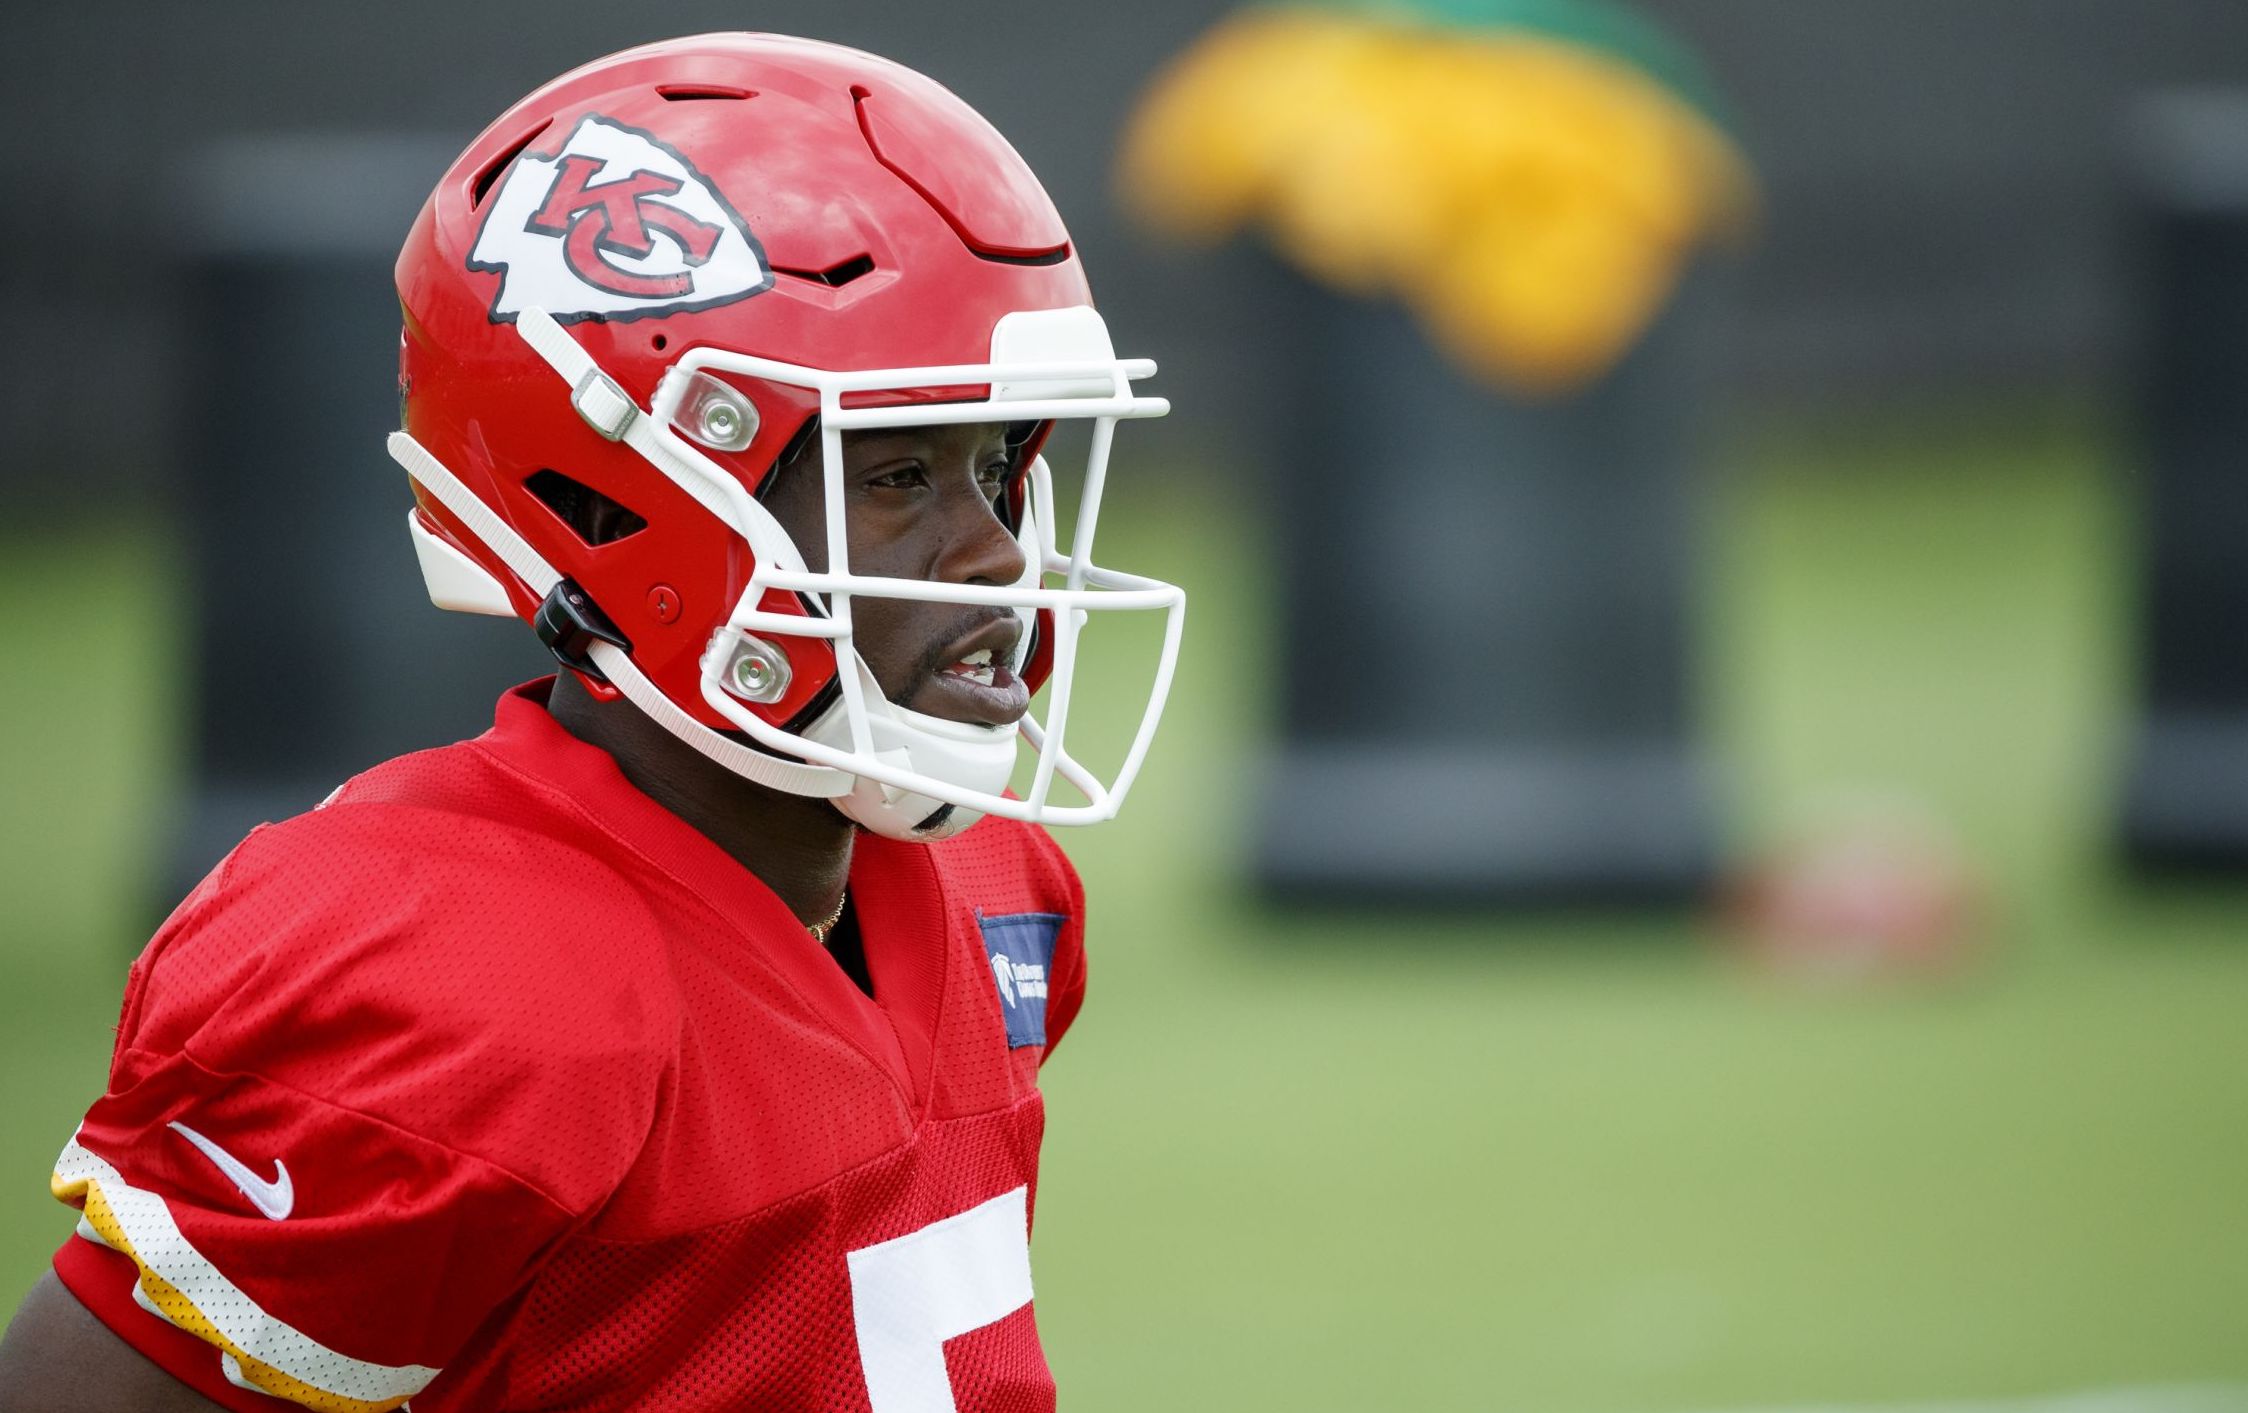 De’Anthony Thomas Brings “Juice” Back to Chiefs